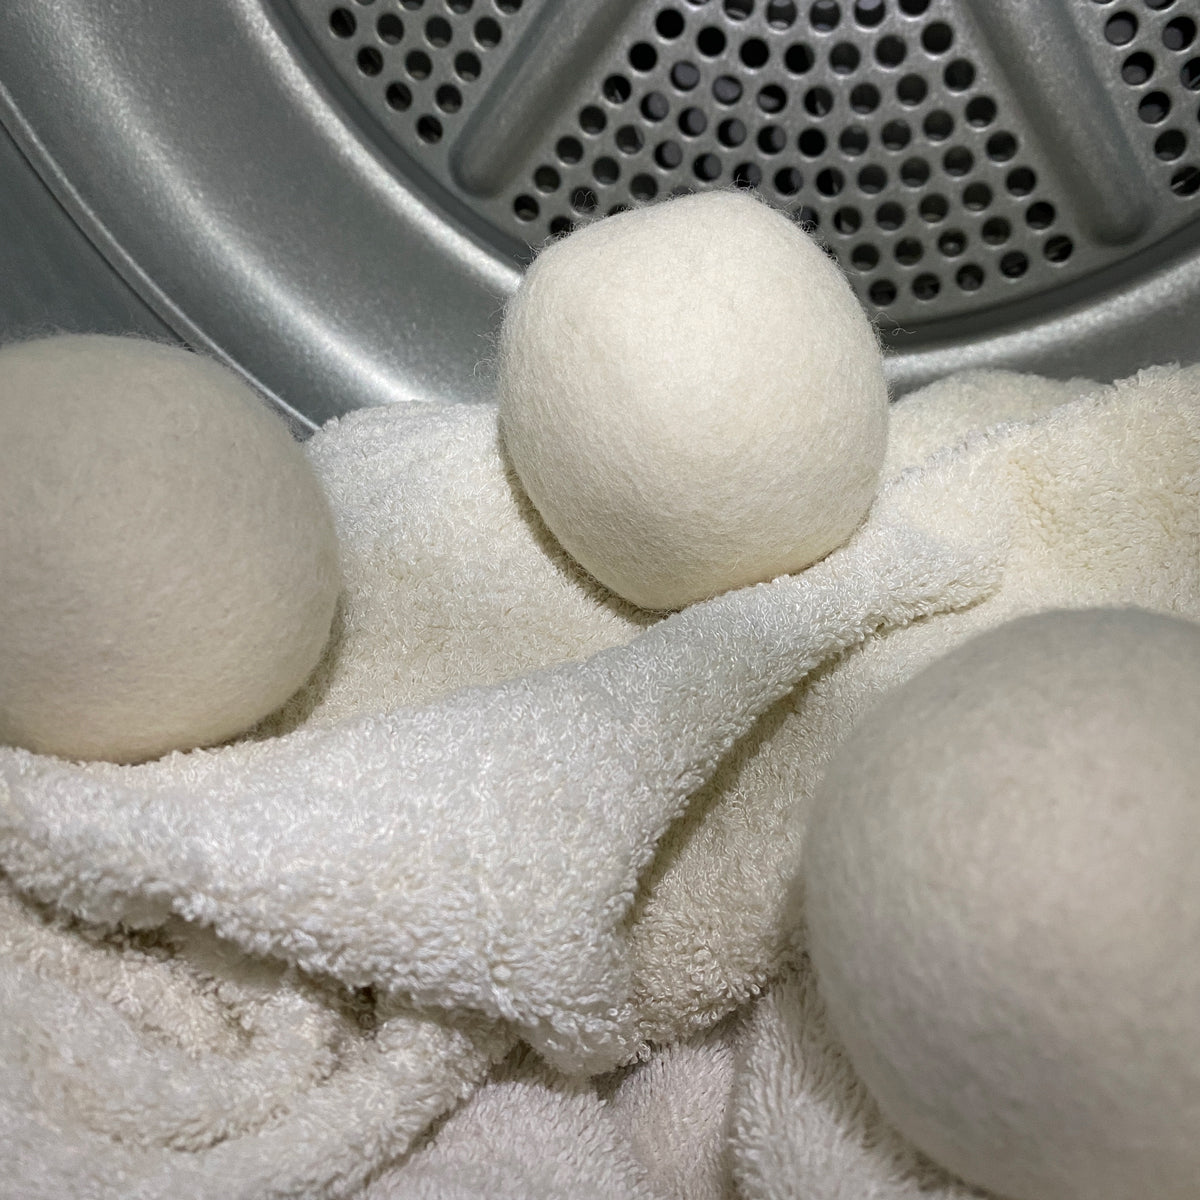 wool dryer balls and towels inside the dryer